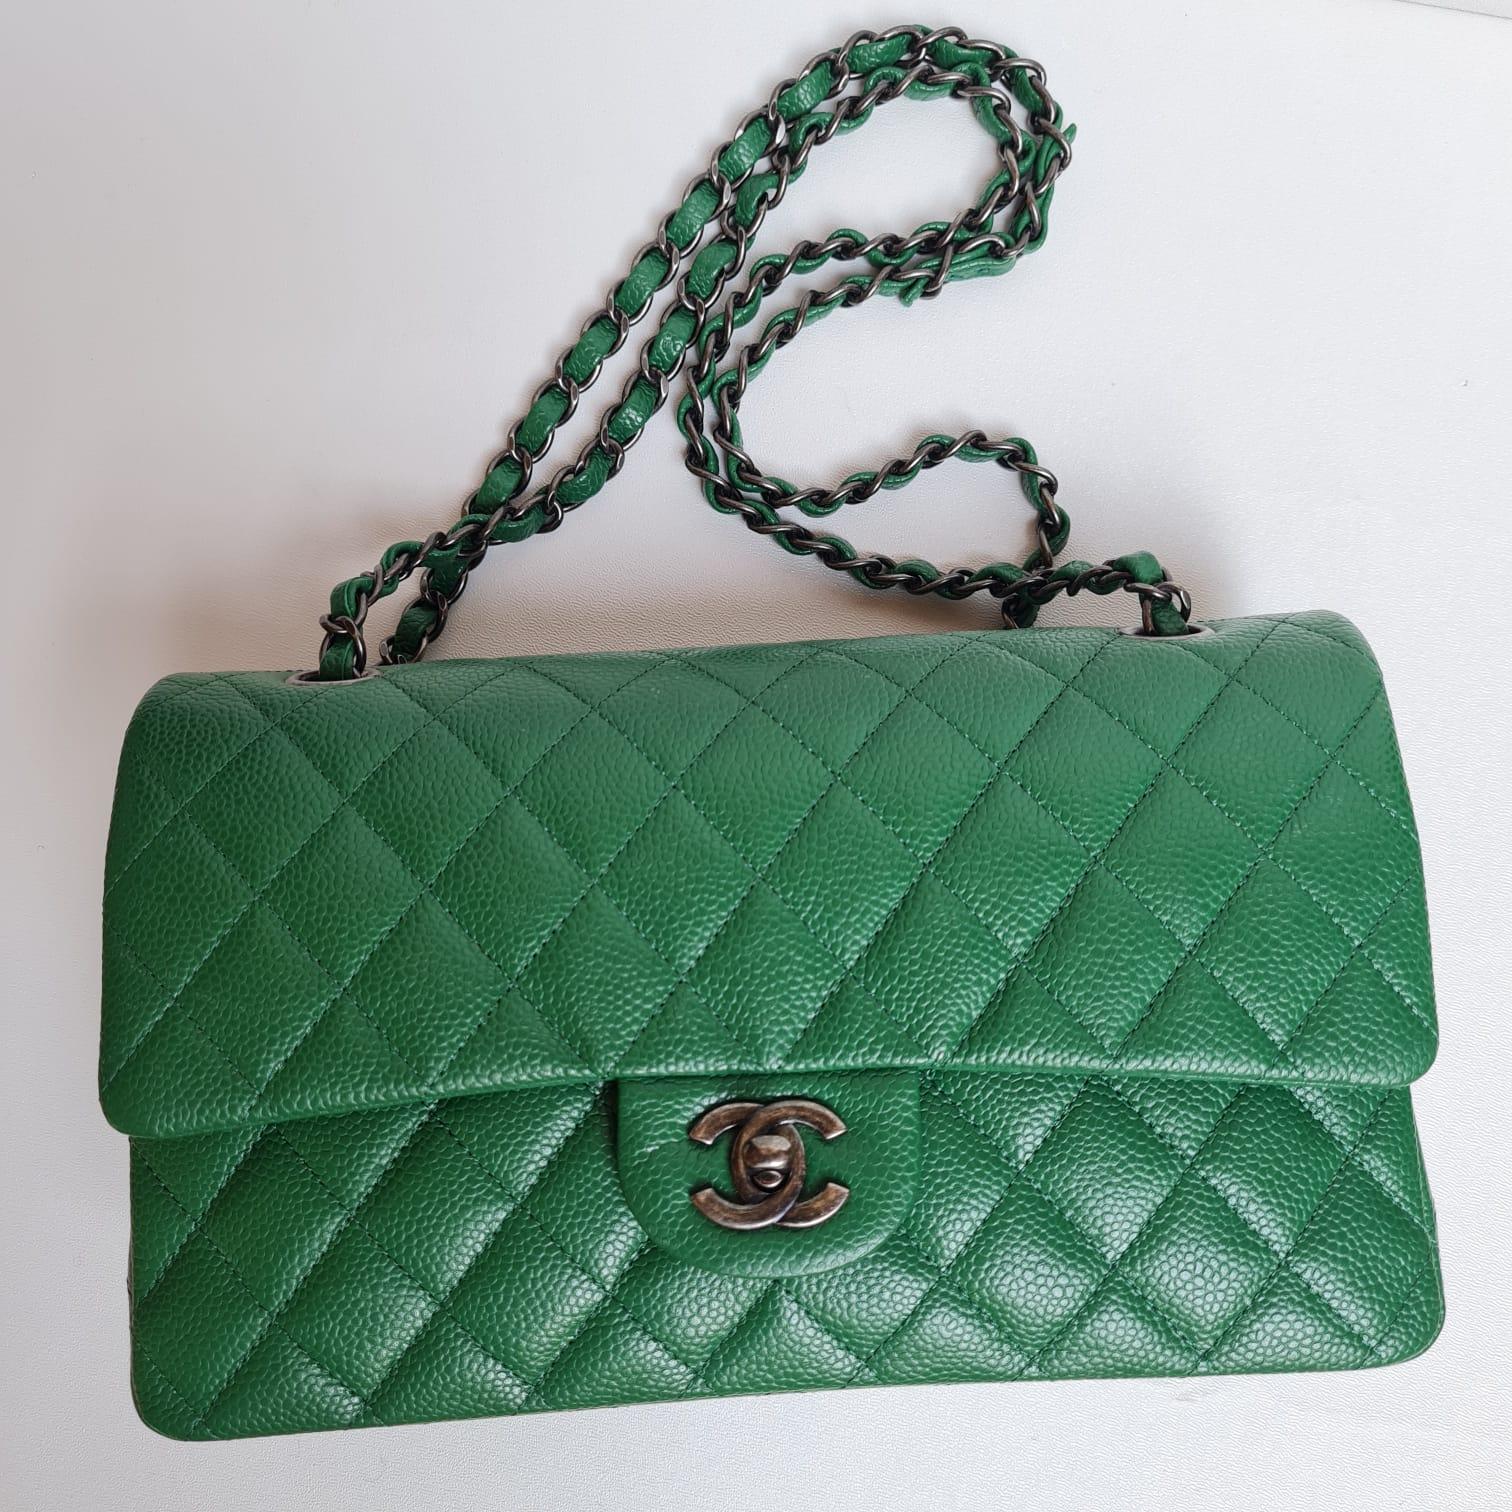 Rare Chanel Emerald Green Caviar Quilted Classic Medium Double Flap Bag RHW 5